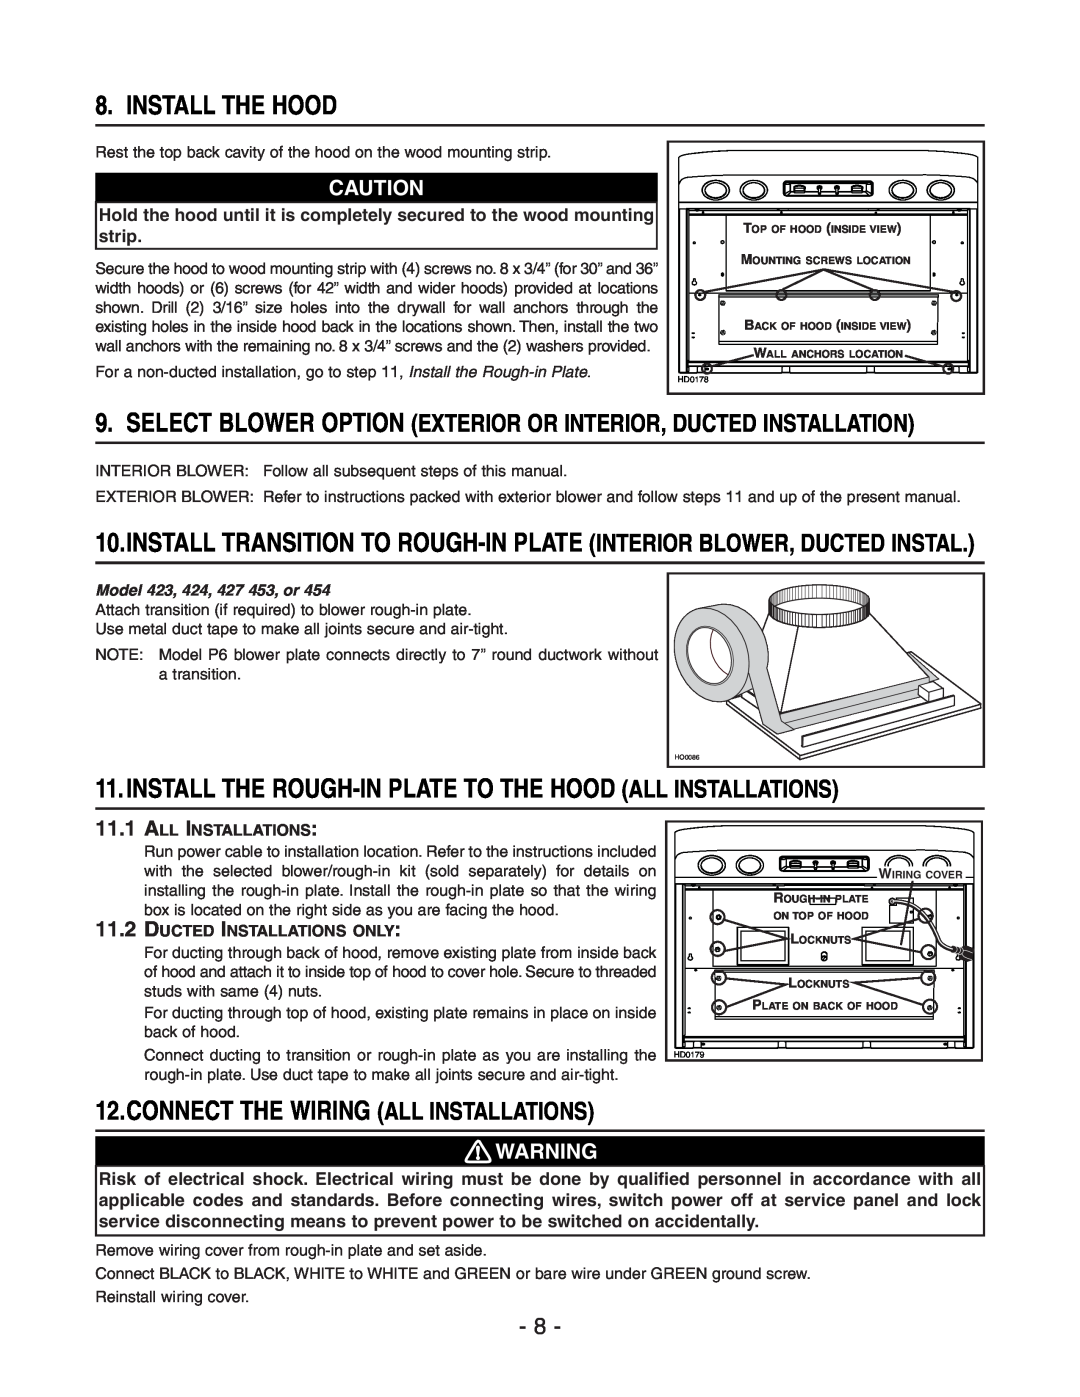 Rangemaster WP29M installation instructions Install The Hood, Install The Rough-In Plate To The Hood All Installations 